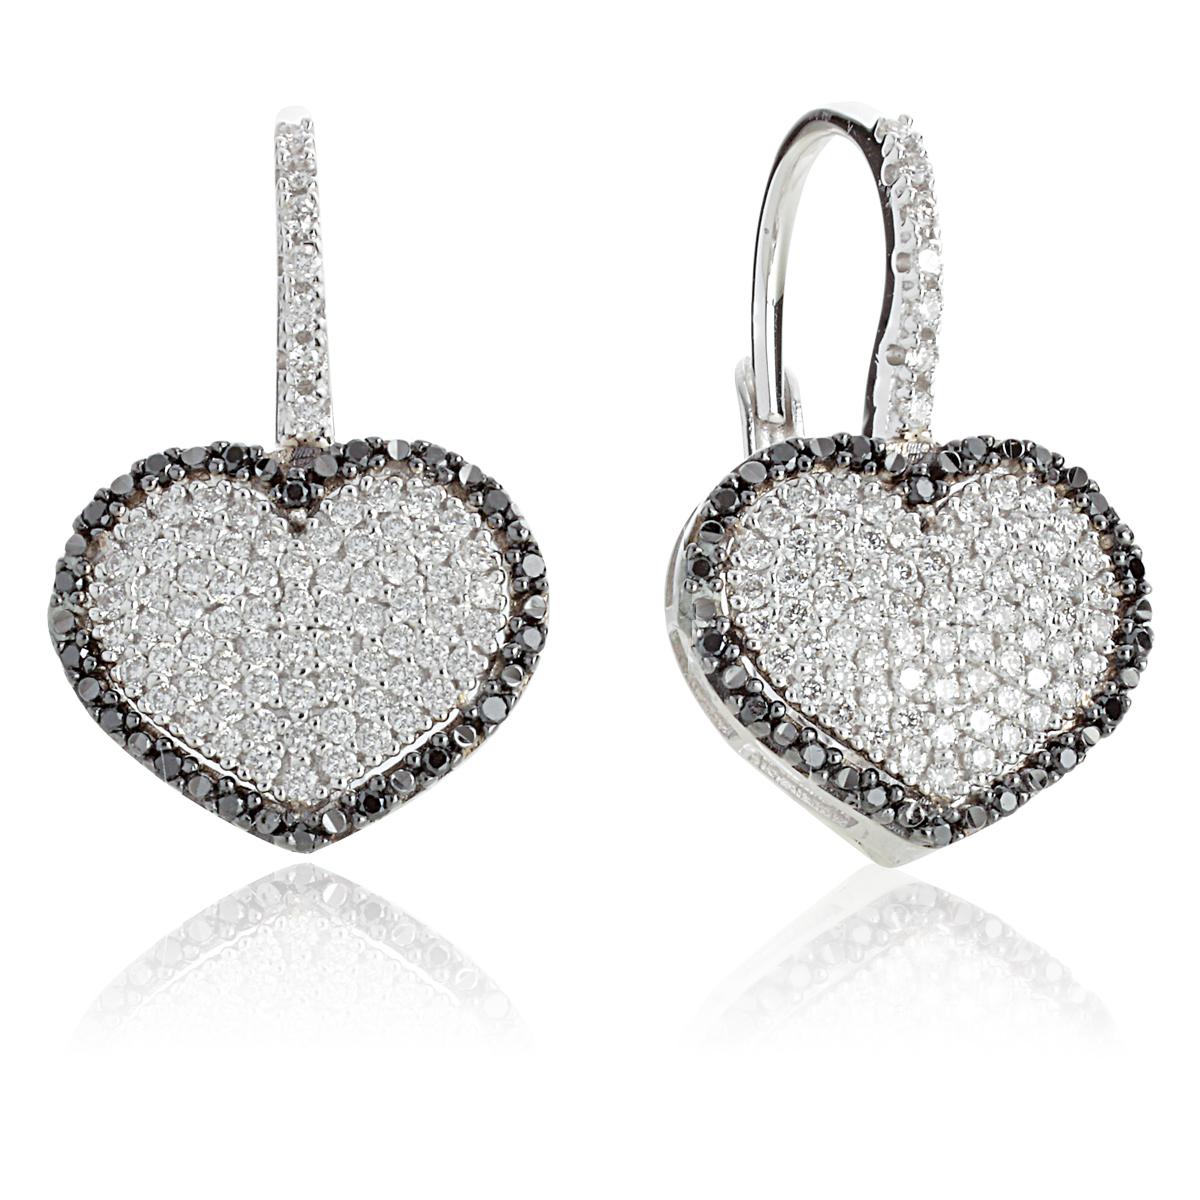 Heart earring in 18kt white gold with white and black diamonds pavé - OD408/DB-4L